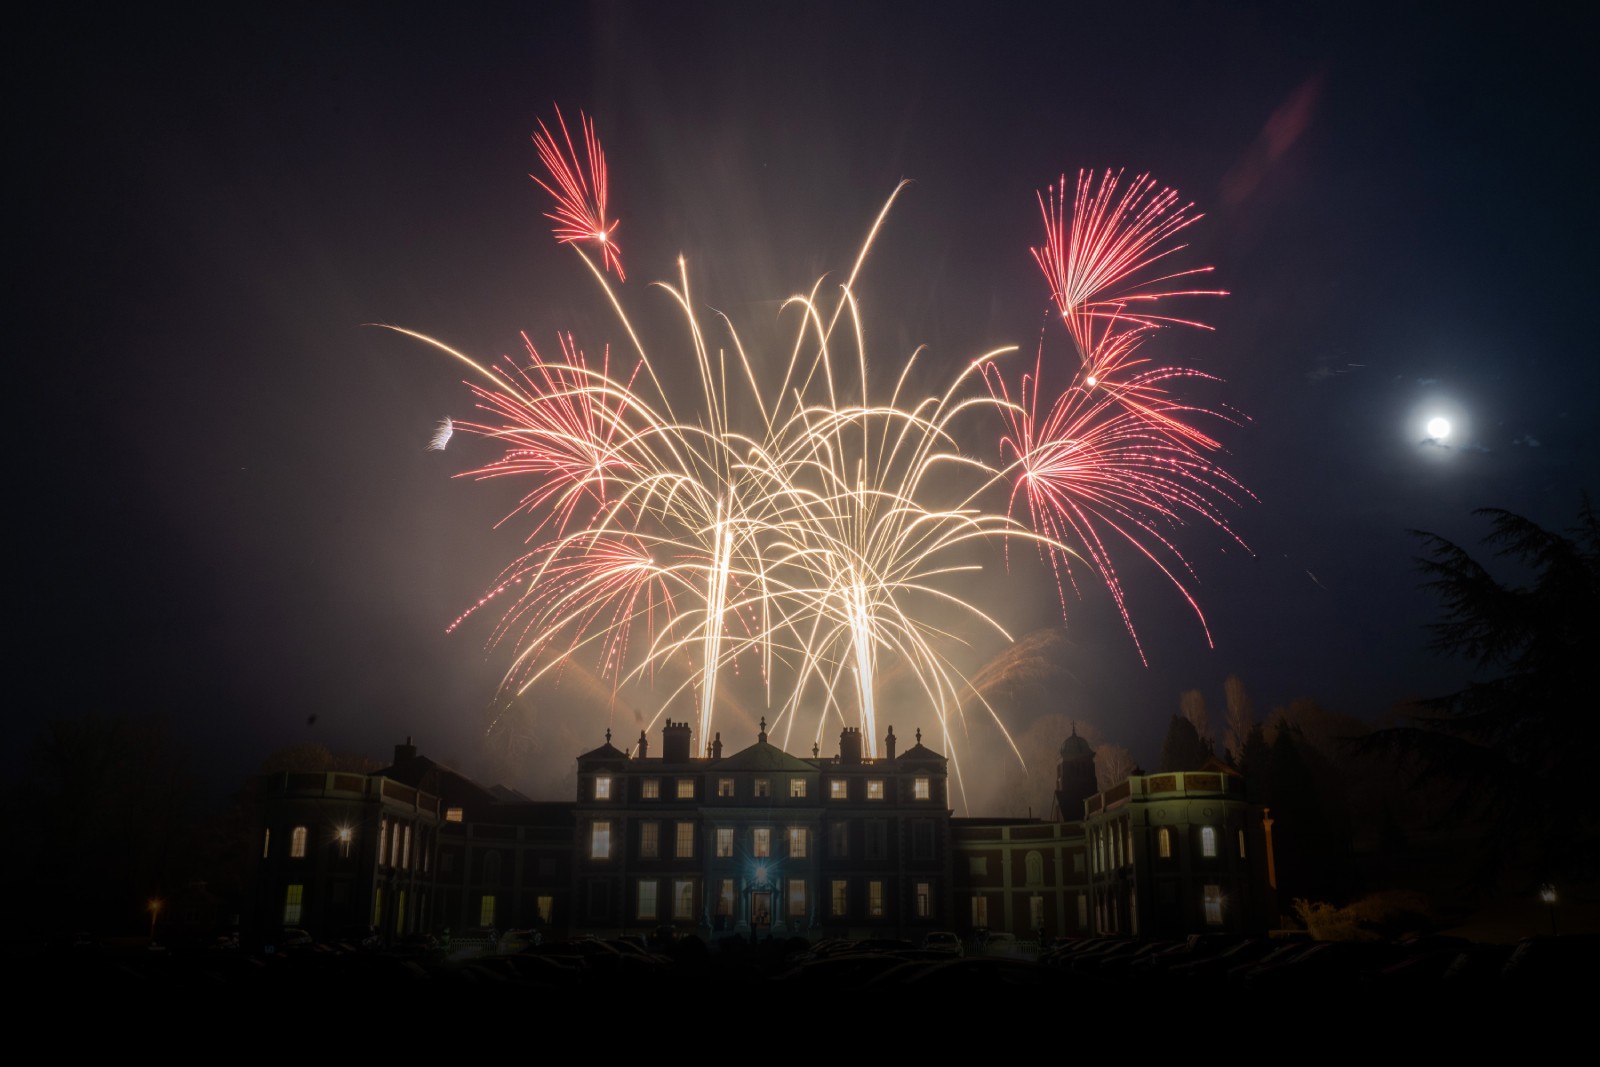 Fireworks display in the grounds of Hawkstone Hall & Gardens